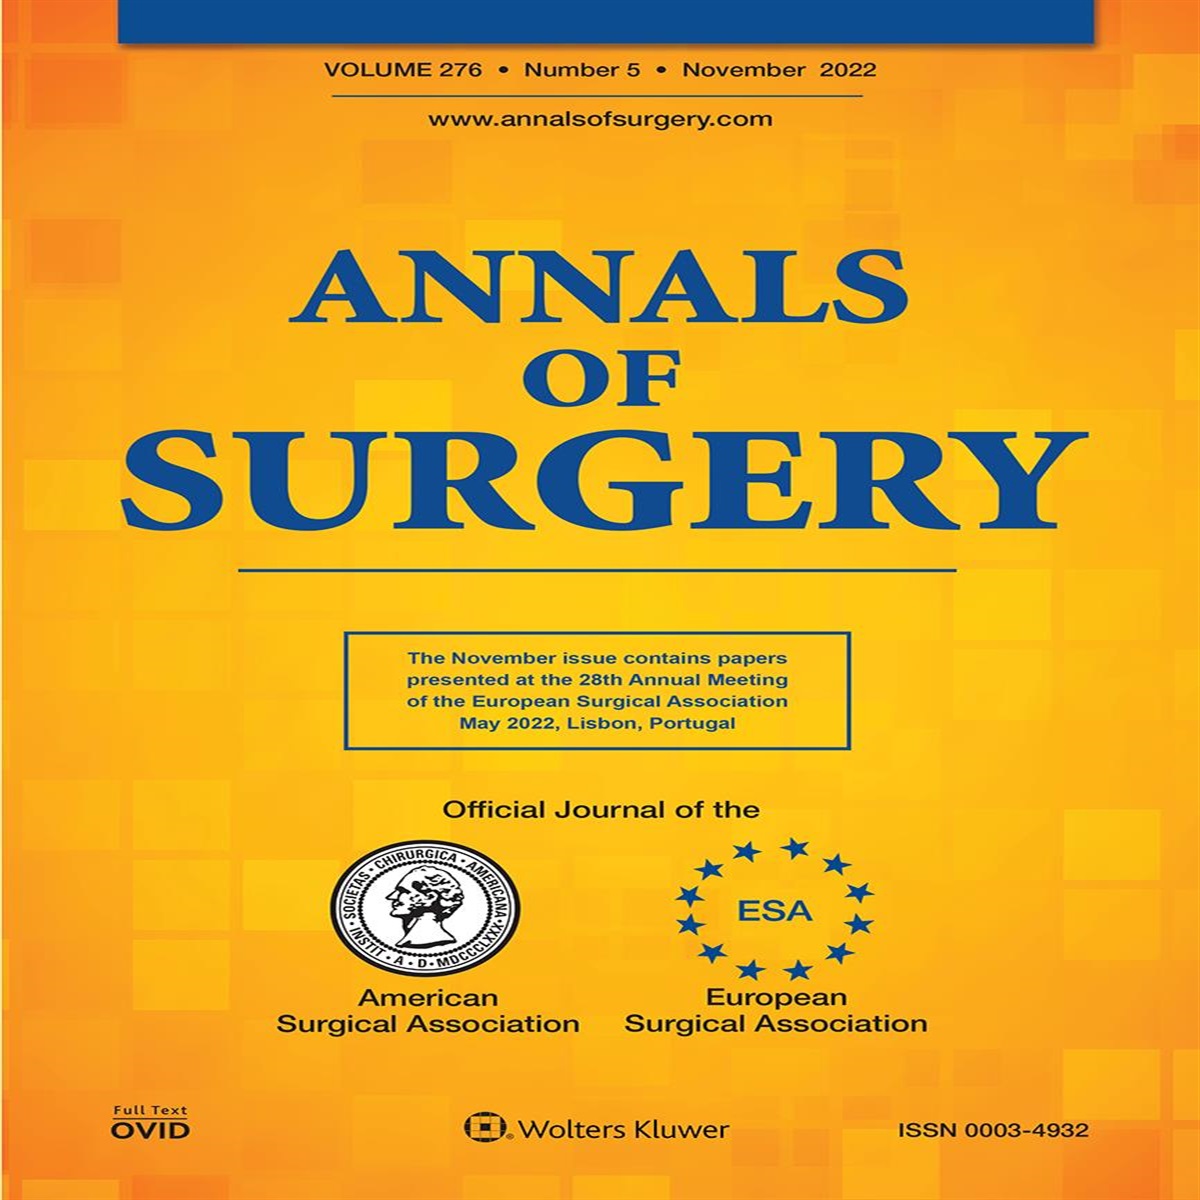 Comment on: Routine Postsurgical Anesthesia Visit to Improve 30-Day Morbidity and Mortality: A Multicenter, Stepped-Wedge Cluster Randomized Interventional Study (the TRACE Study)